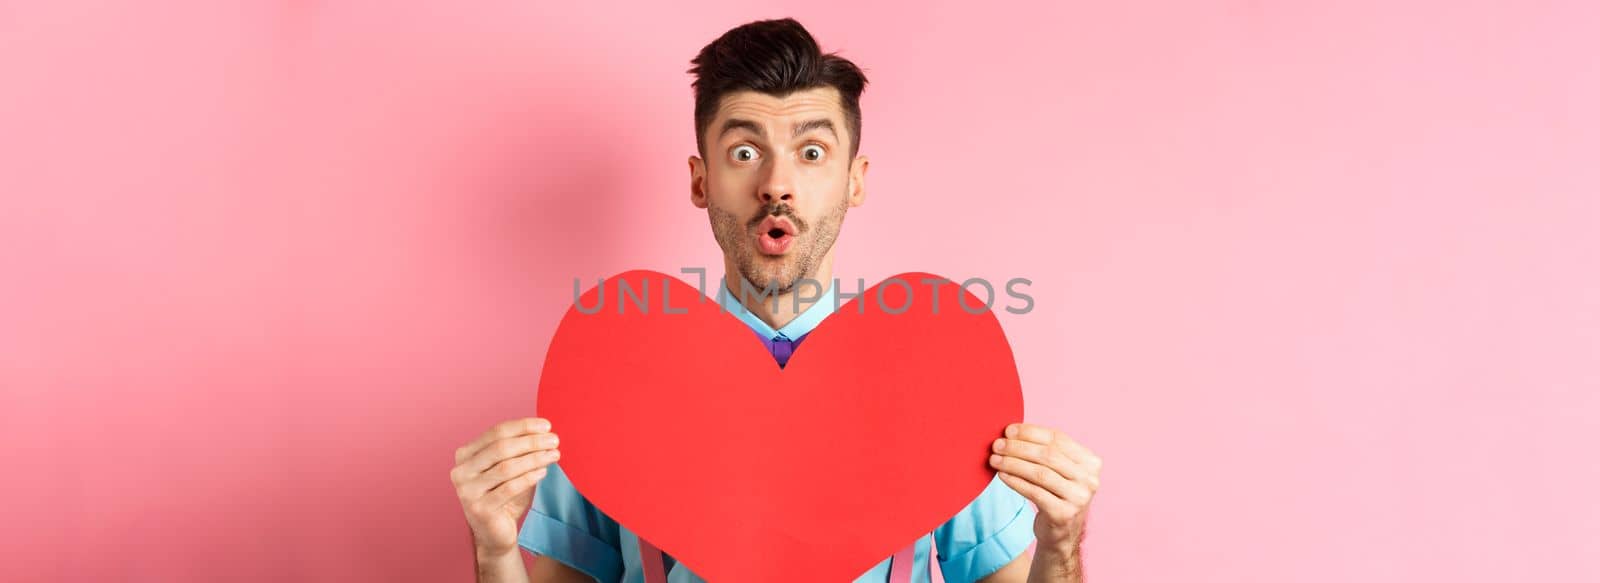 Valentines day concept. Amused young man with bow-tie and moustache, showing heart cutout and looking for love, standing on pink romantic background.